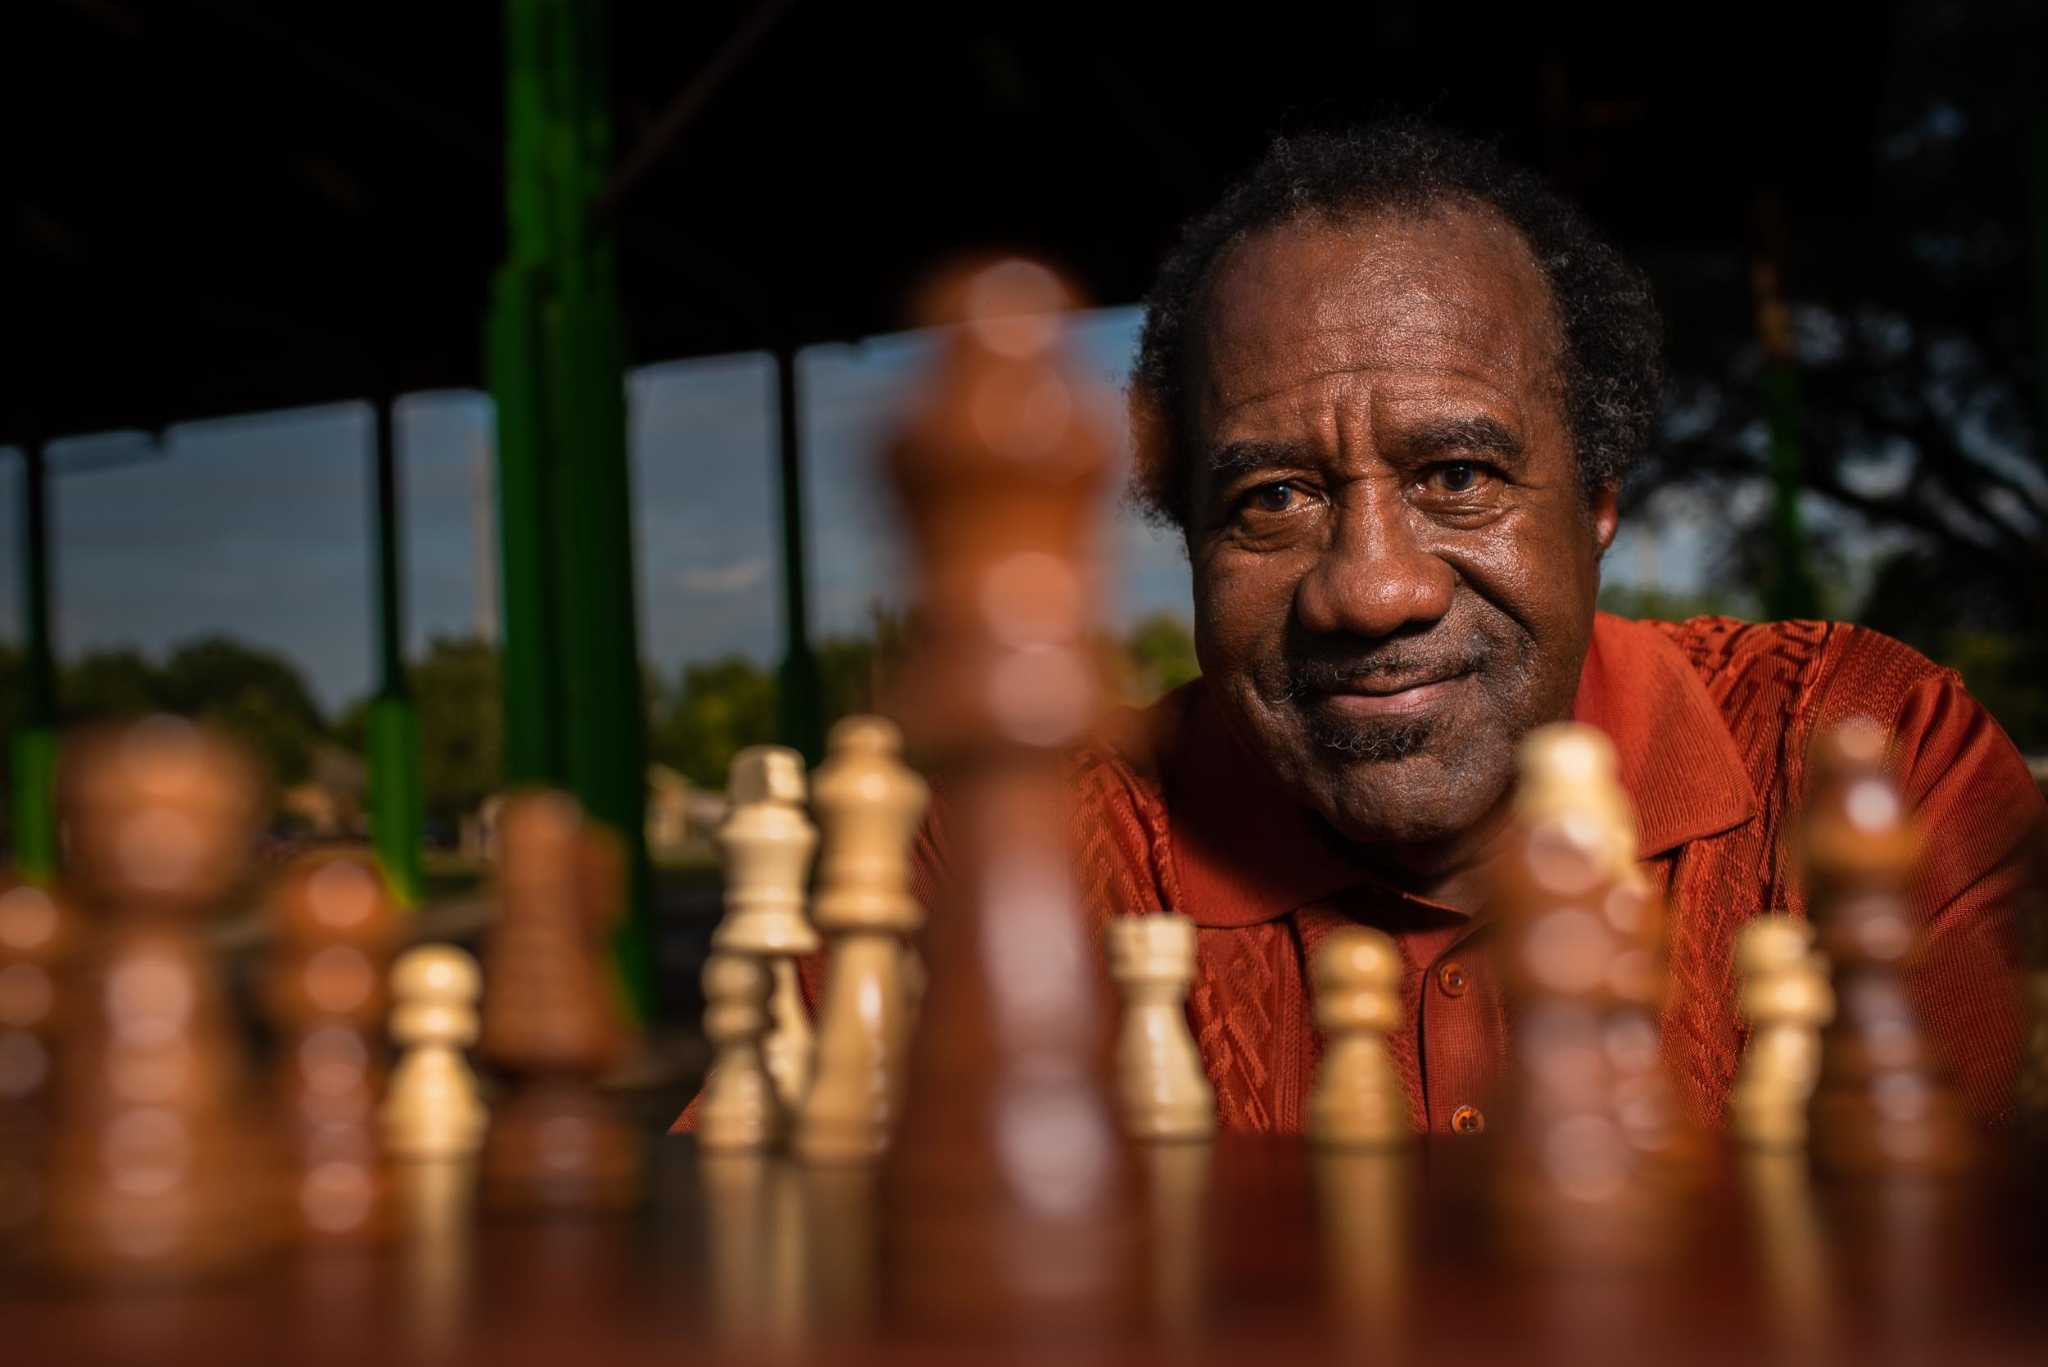 60 years later, Worthing alum reflects on chess team that